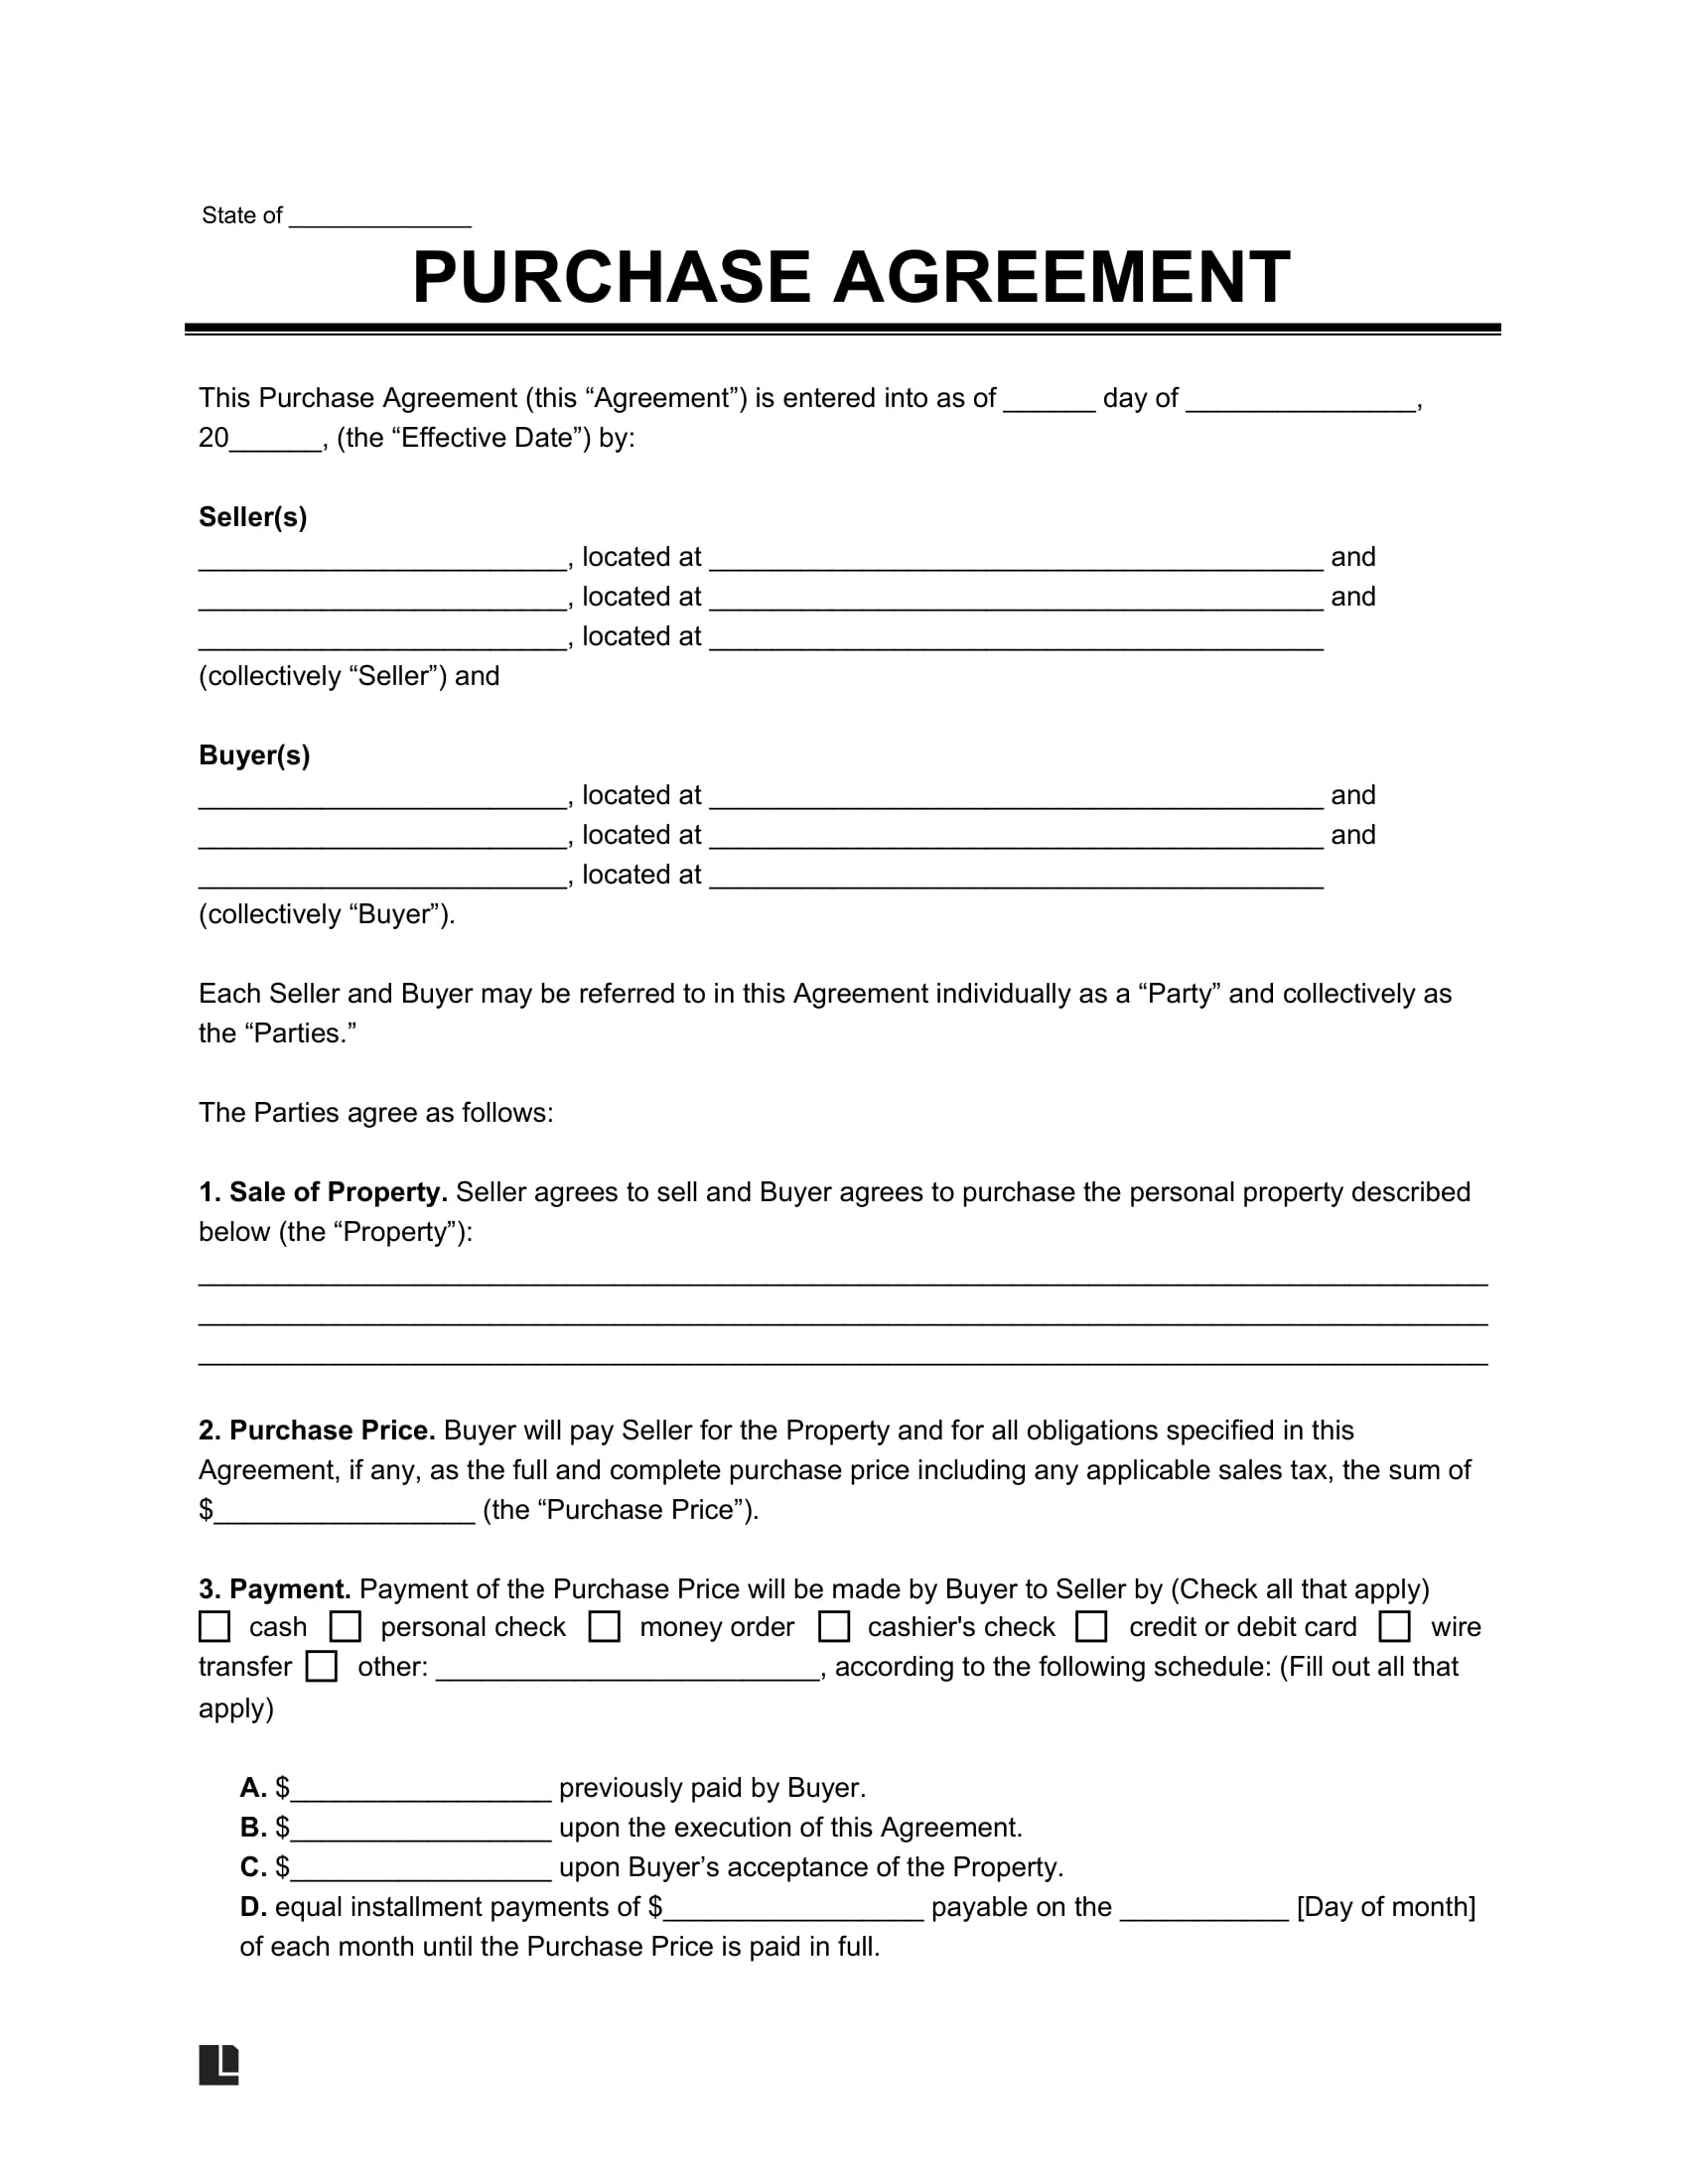 purchase agreement template